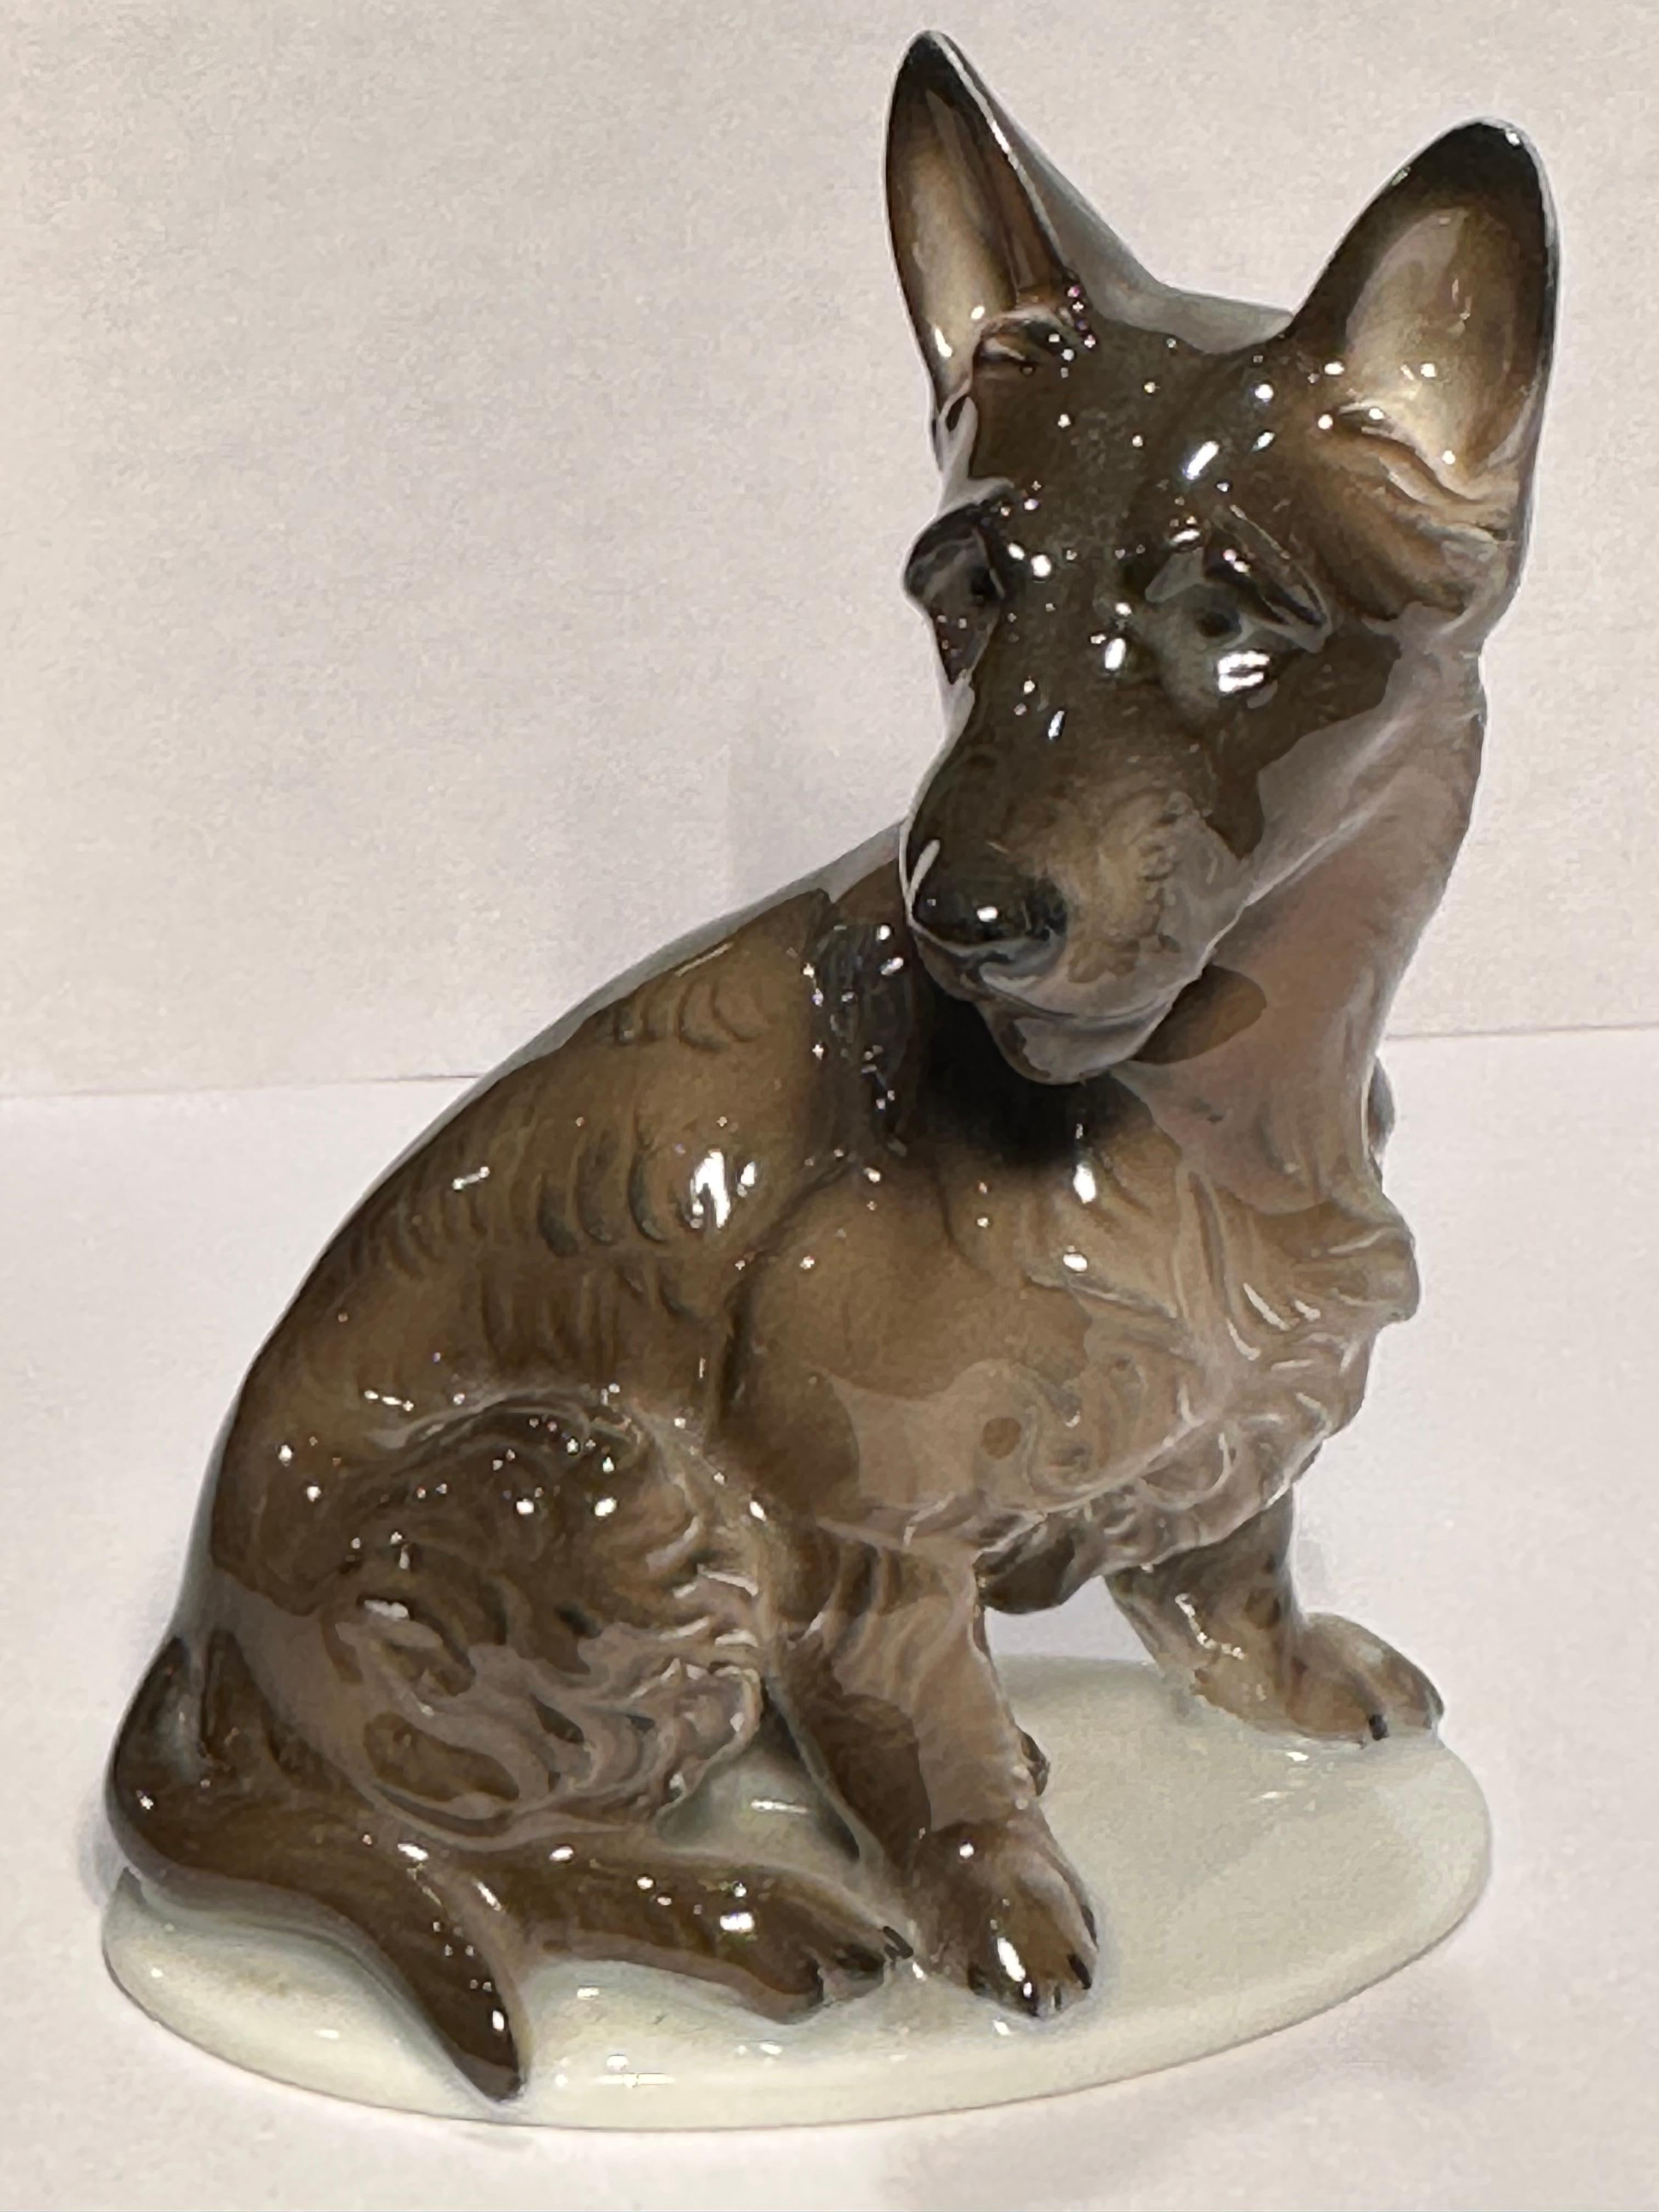 
Finest quality, vintage retired, handmade and hand painted in Bavaria, Rosenthal porcelain German Shepherd dog figurine. The dog has been masterfully handmade and hand painted with great attention to detail by a skilled Rosenthal artist. The